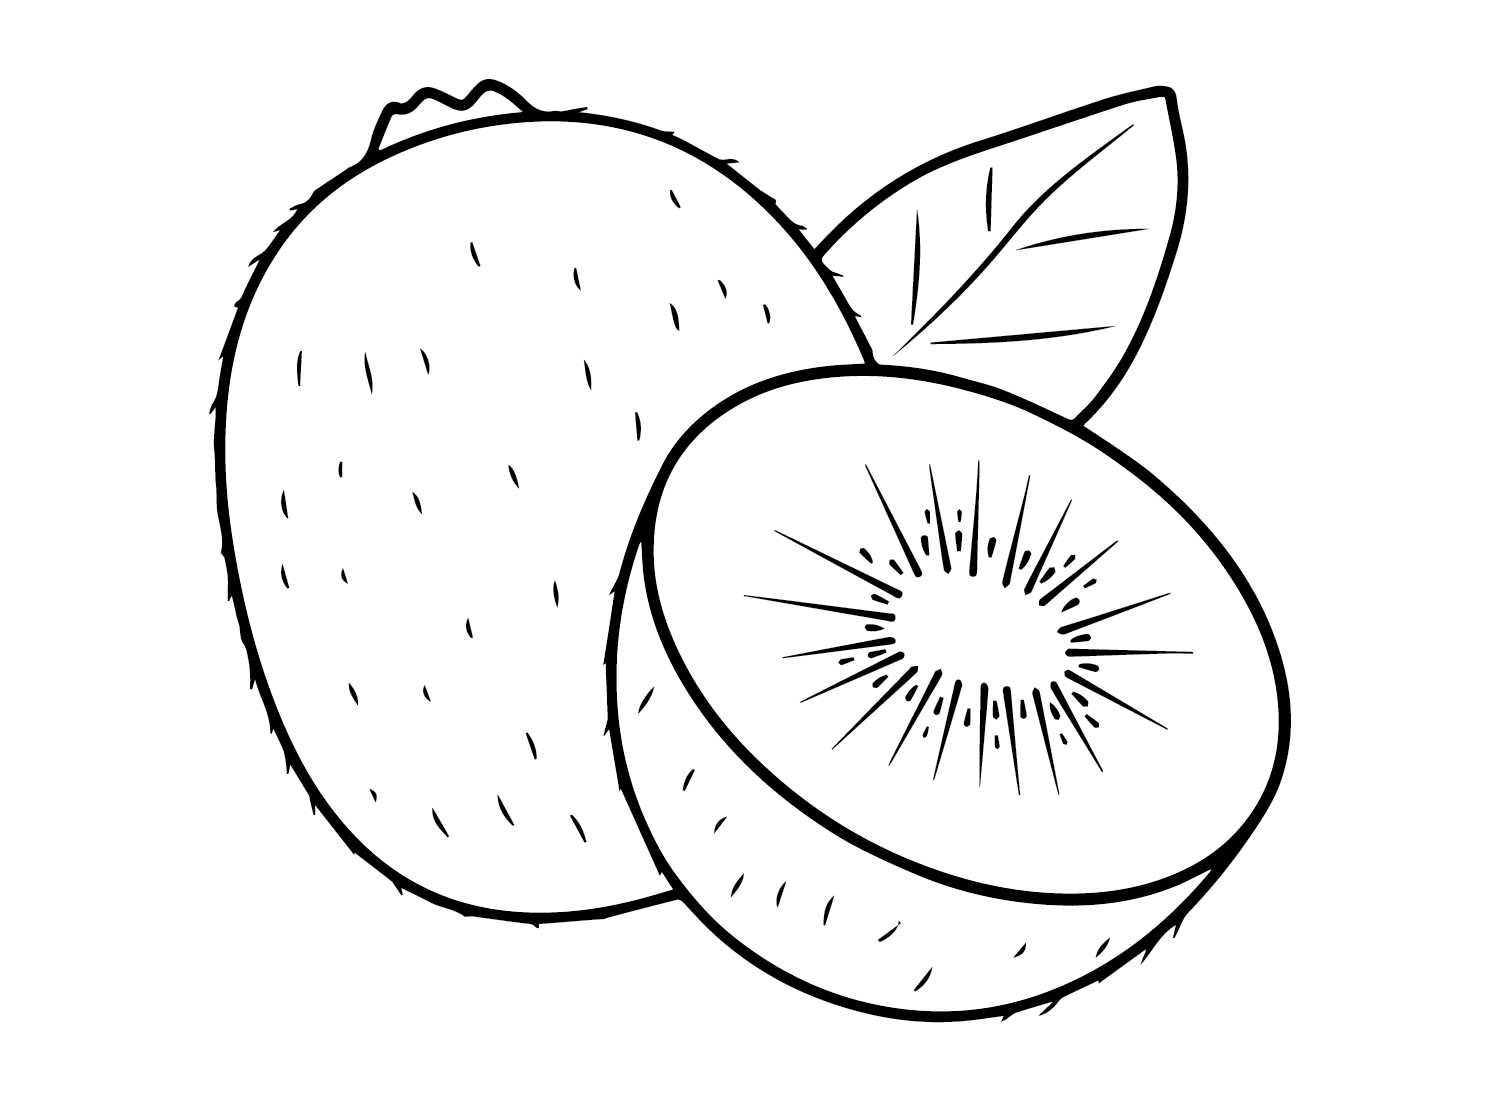 Kiwi Fruit Pictures Coloring Page